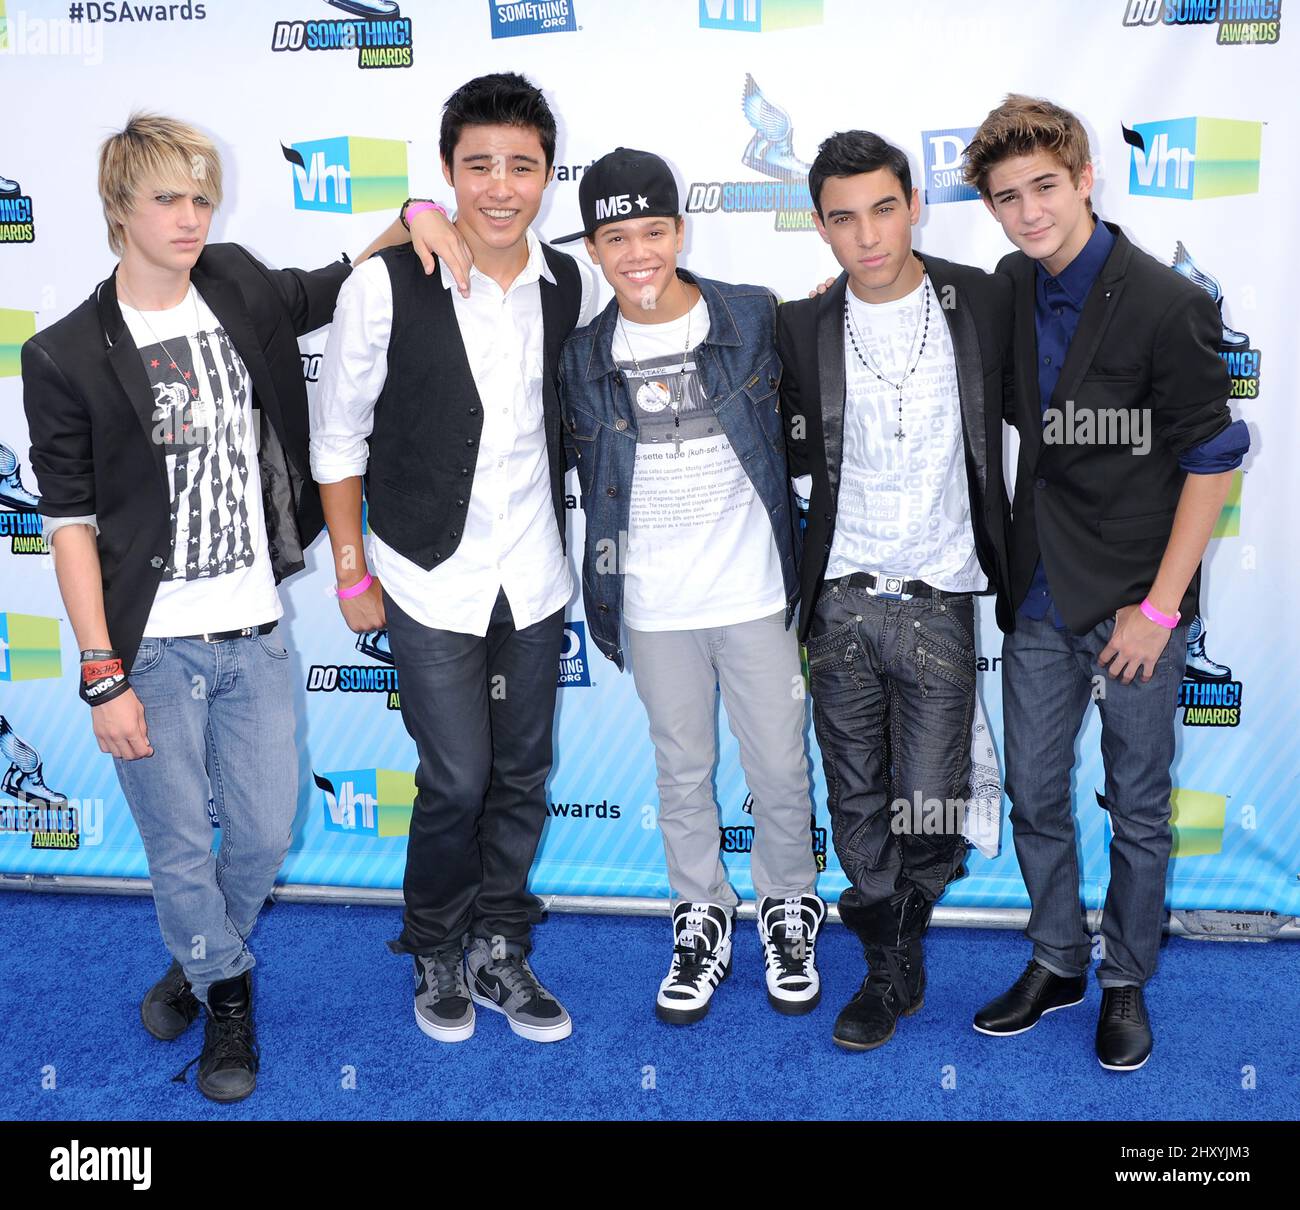 IM5 attends 2012 Do Something Awards presented by VH1 and DoSomething.org held at Barker Hanger, Santa Monica. Stock Photo